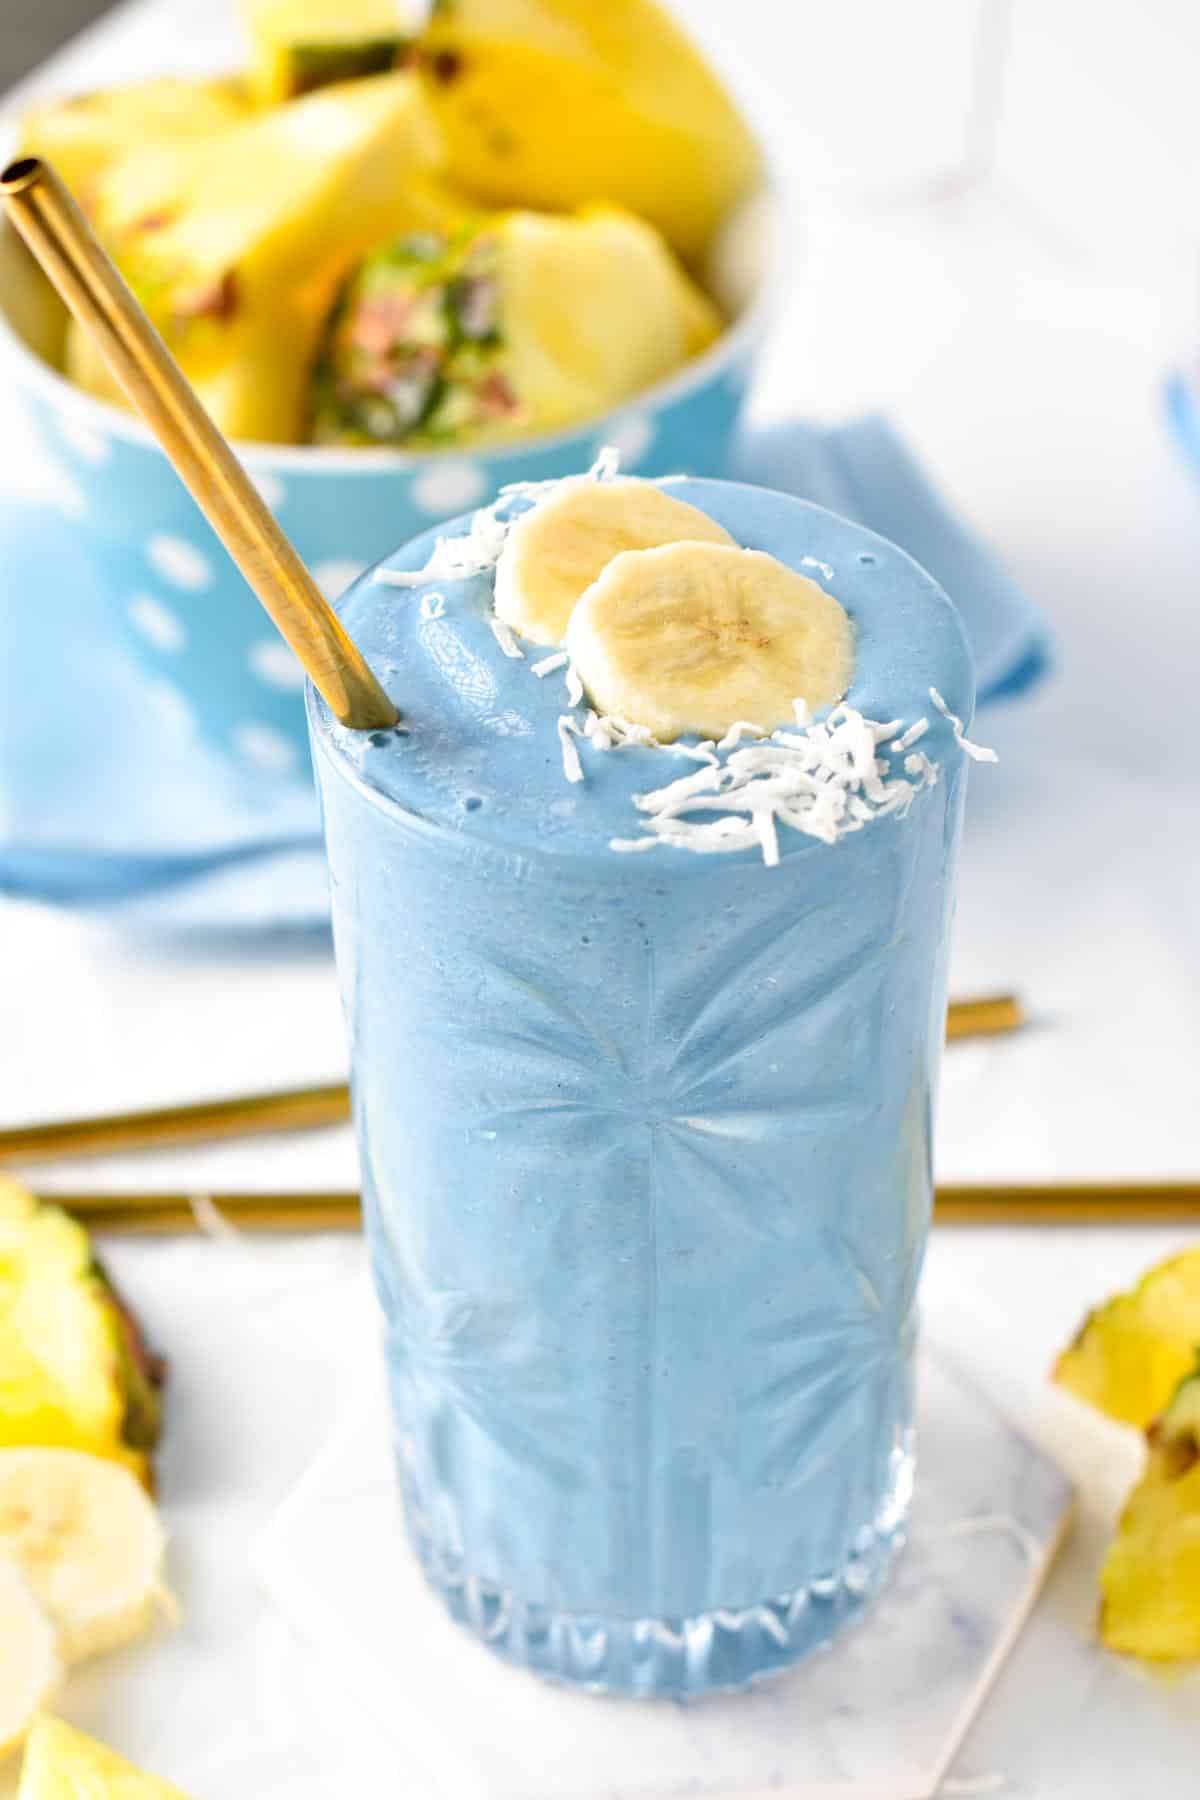 This blue spirulina smoothie is a creamy and smooth anti-oxidant smoothie with a vibrant blue lagoon color. Plus, the smoothie is also dairy-free, and vegan-friendly.